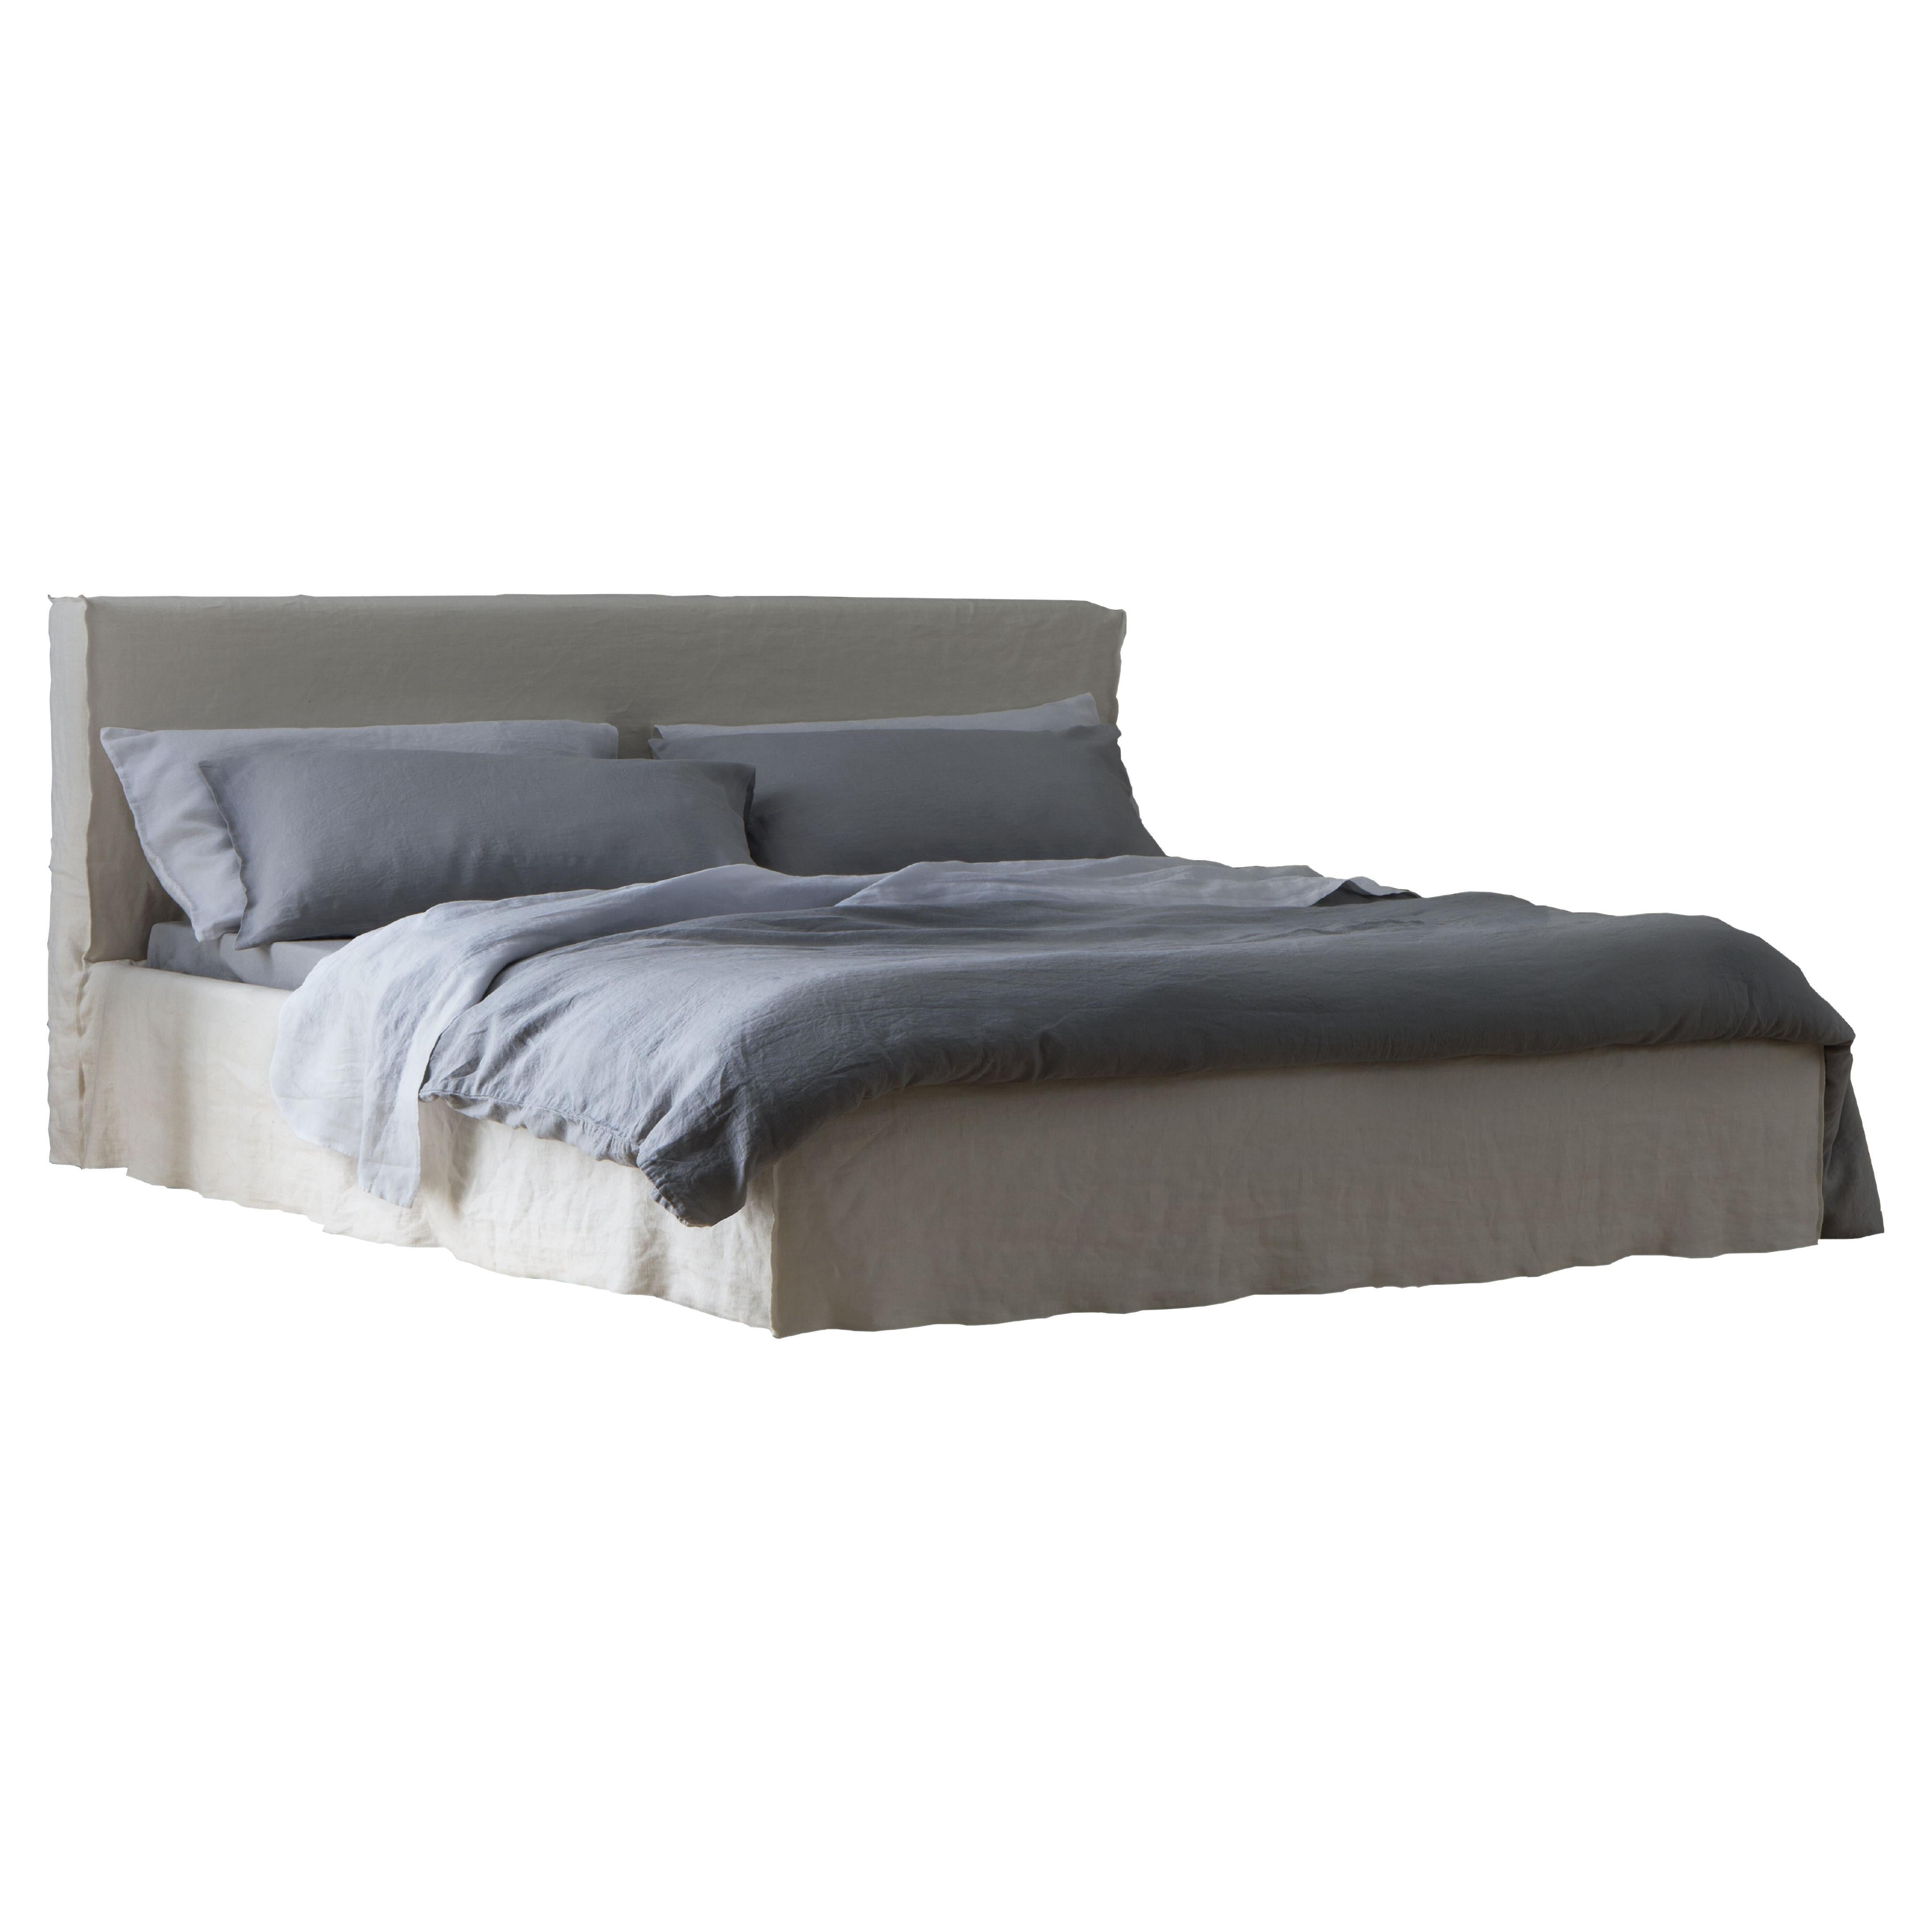 Gervasoni Brick 80 E Knock Down Bed in Butter Upholstery by Paola Navone For Sale